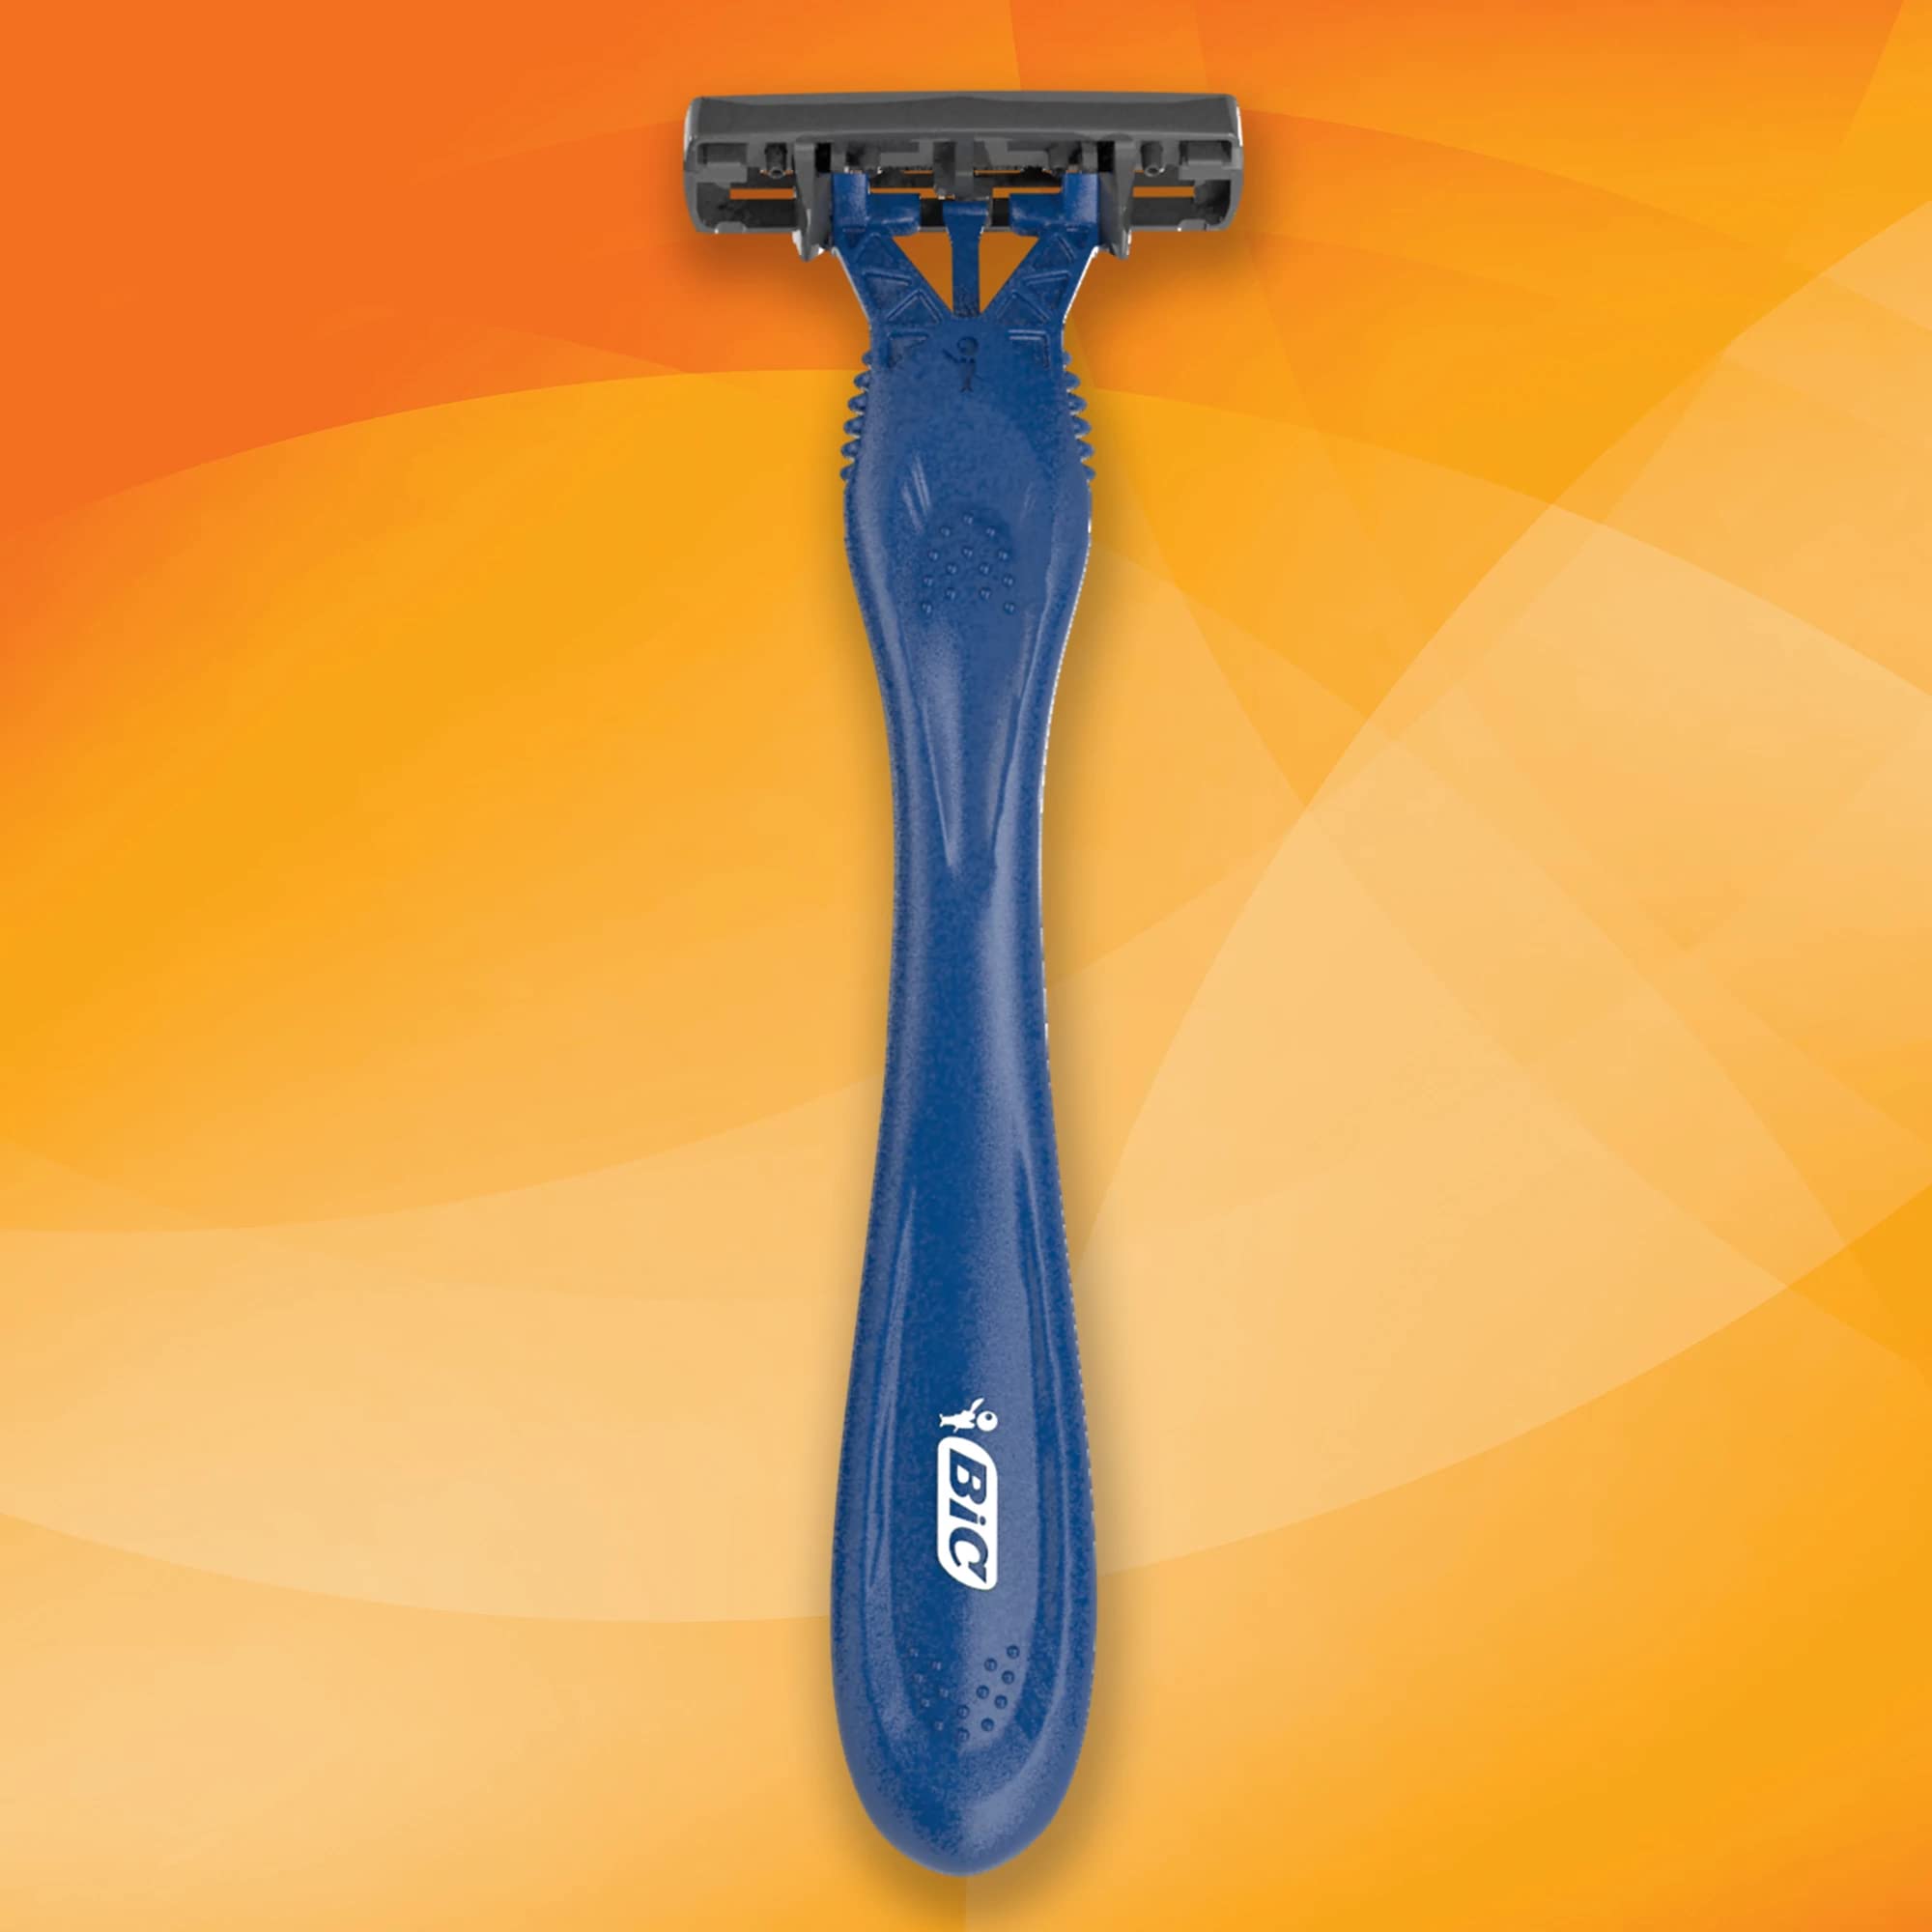 BIC Comfort 3 Advanced Men's Disposable Razor, Triple Blade, Pack of 6 Razors, For a Simply Smoother Shave